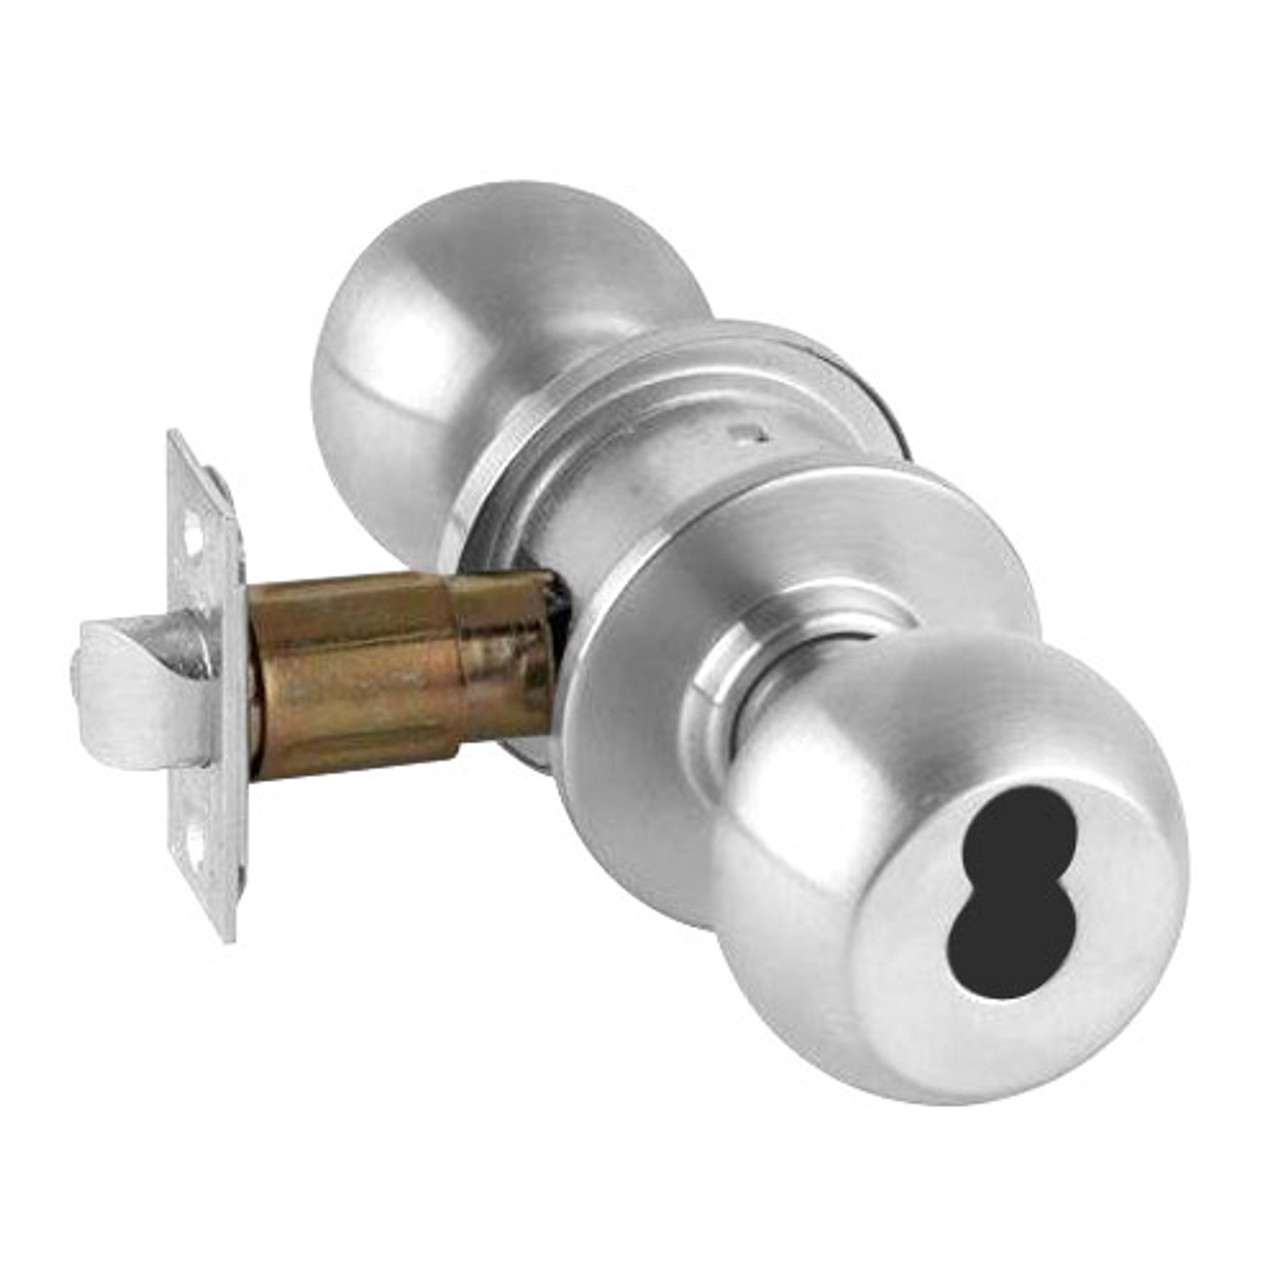 A80JD-ORB-625 Schlage Orbit Commercial Cylindrical Lock in Bright Chromium Plated